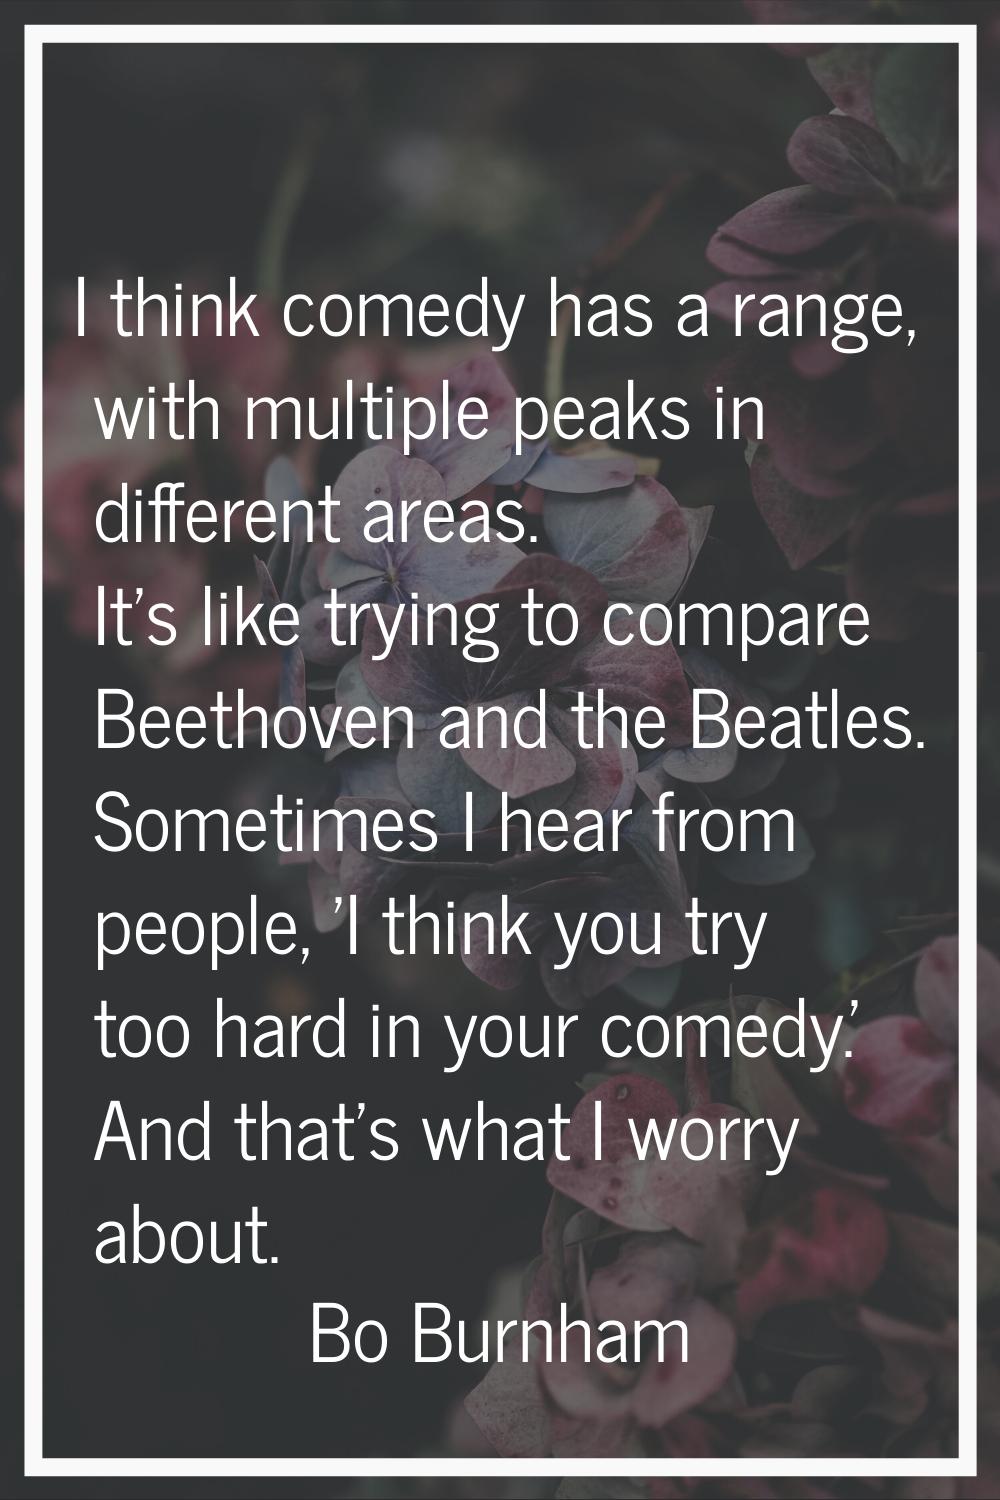 I think comedy has a range, with multiple peaks in different areas. It's like trying to compare Bee